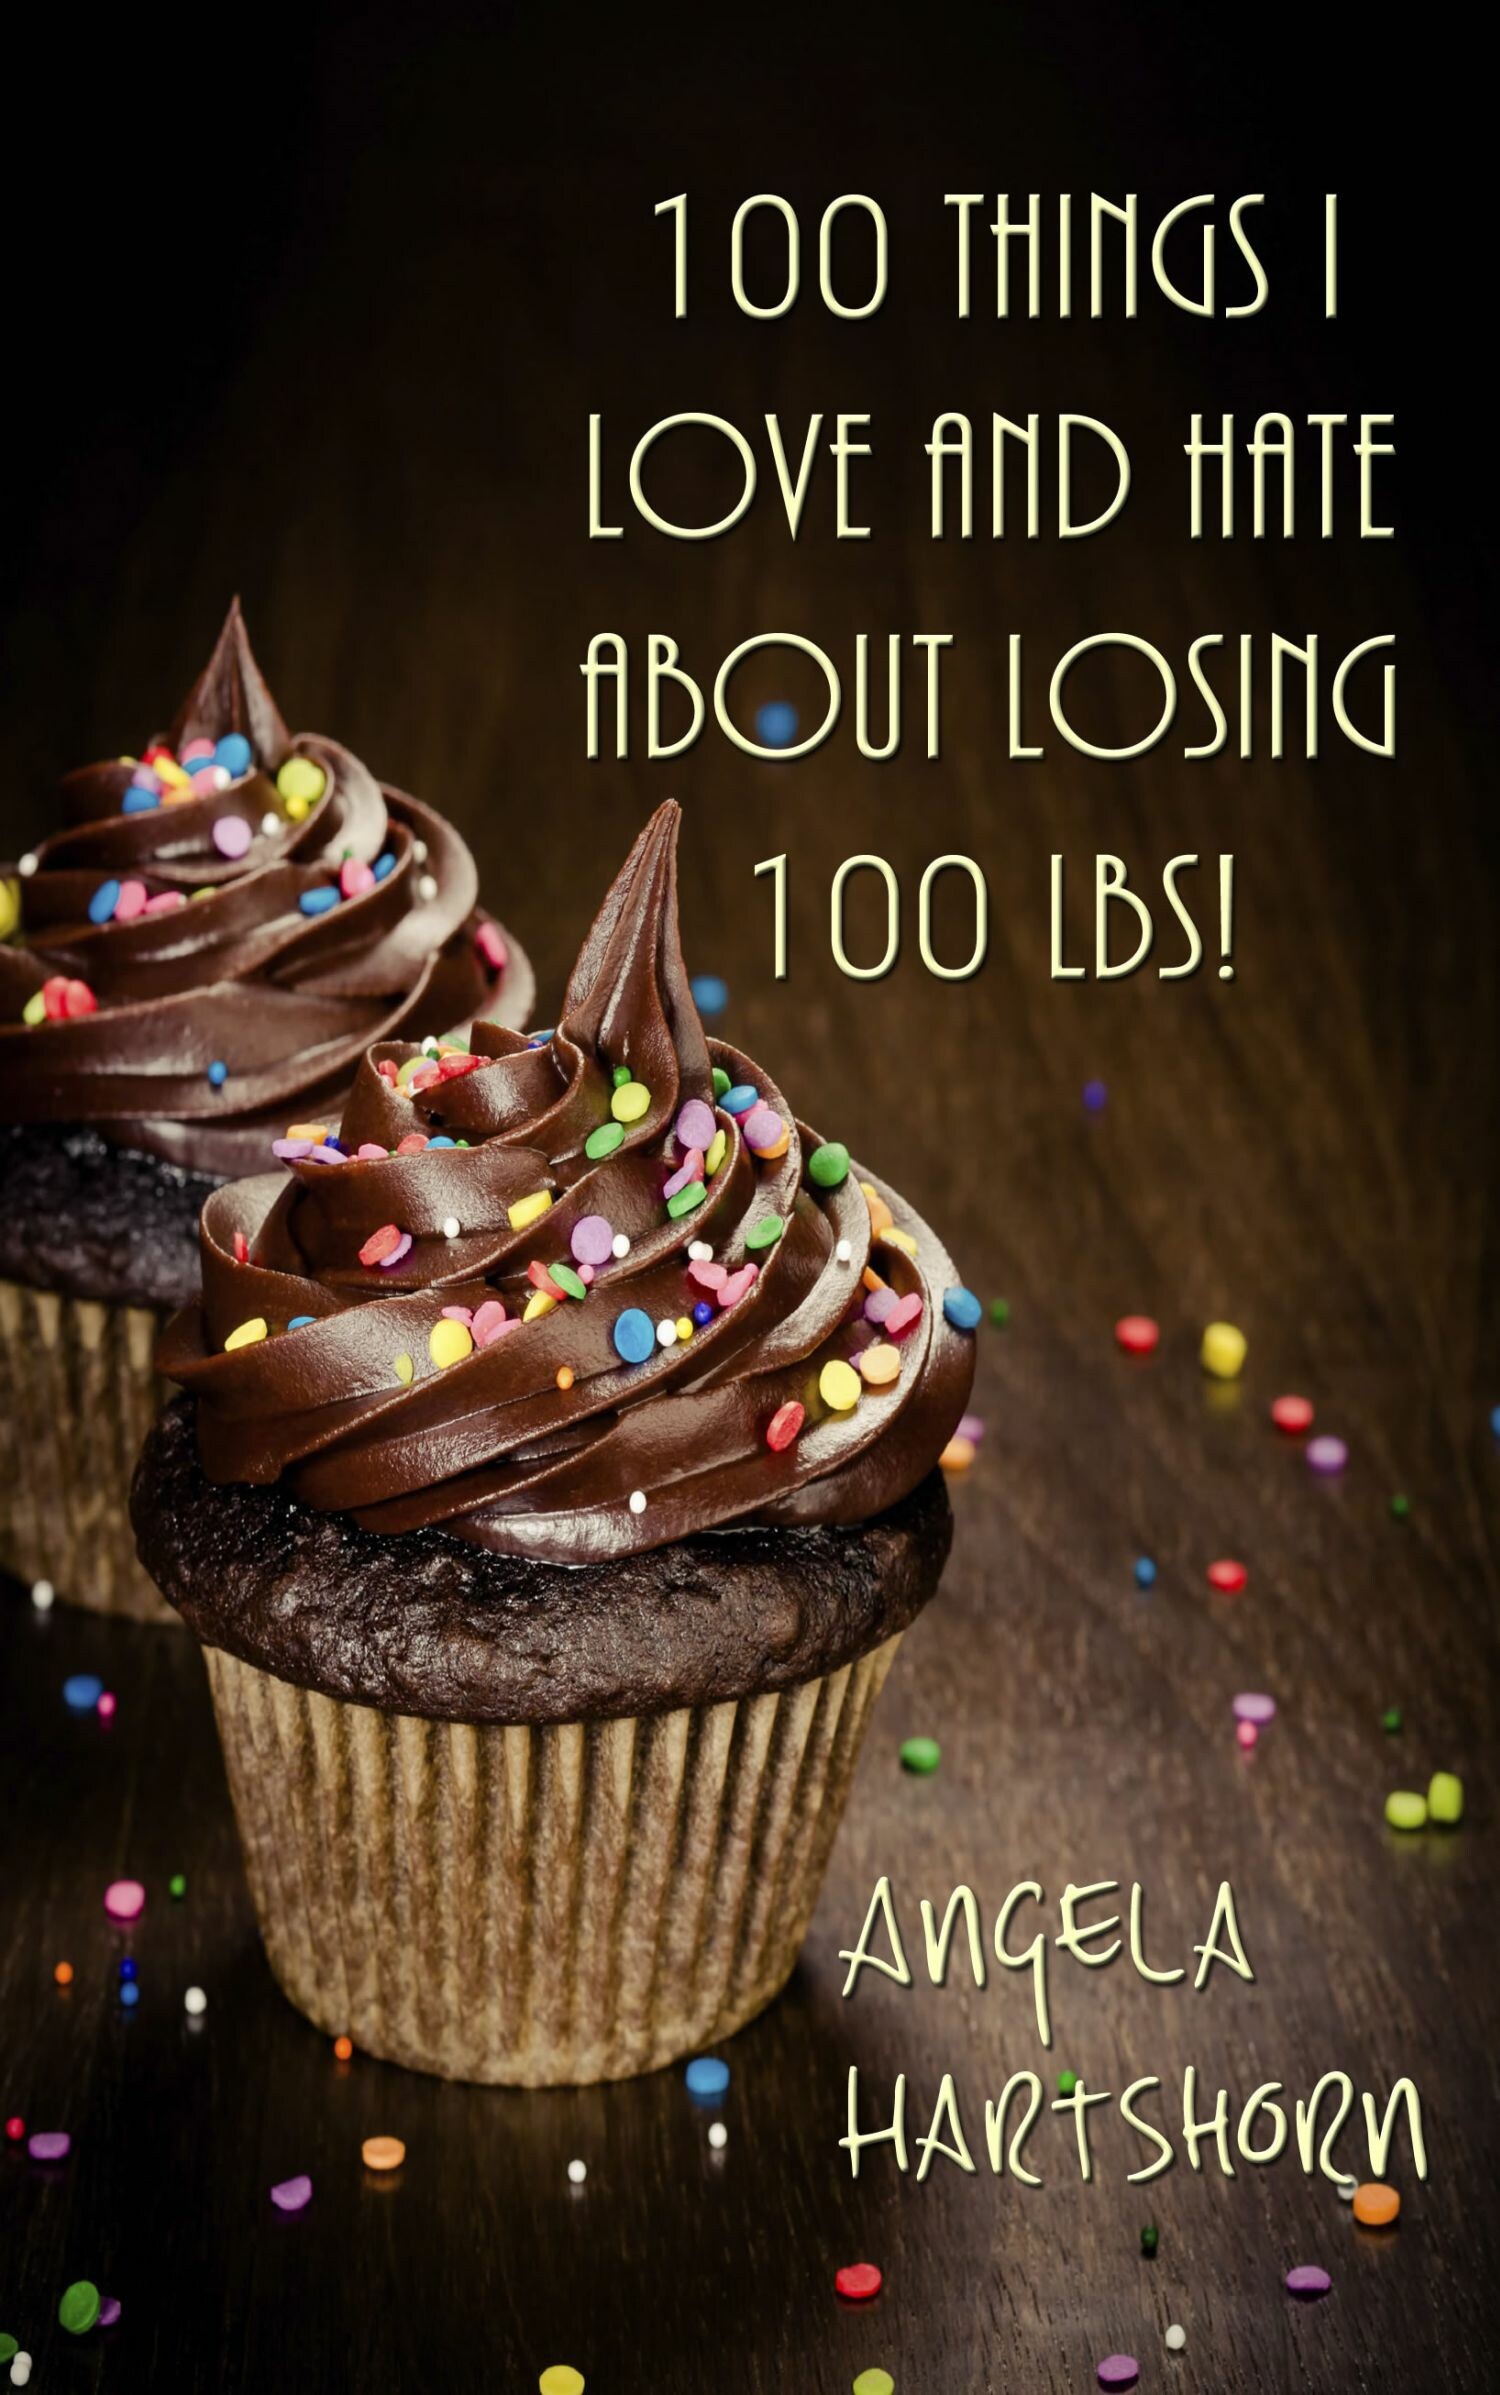 100 things I love and hate about losing 100 lbs!